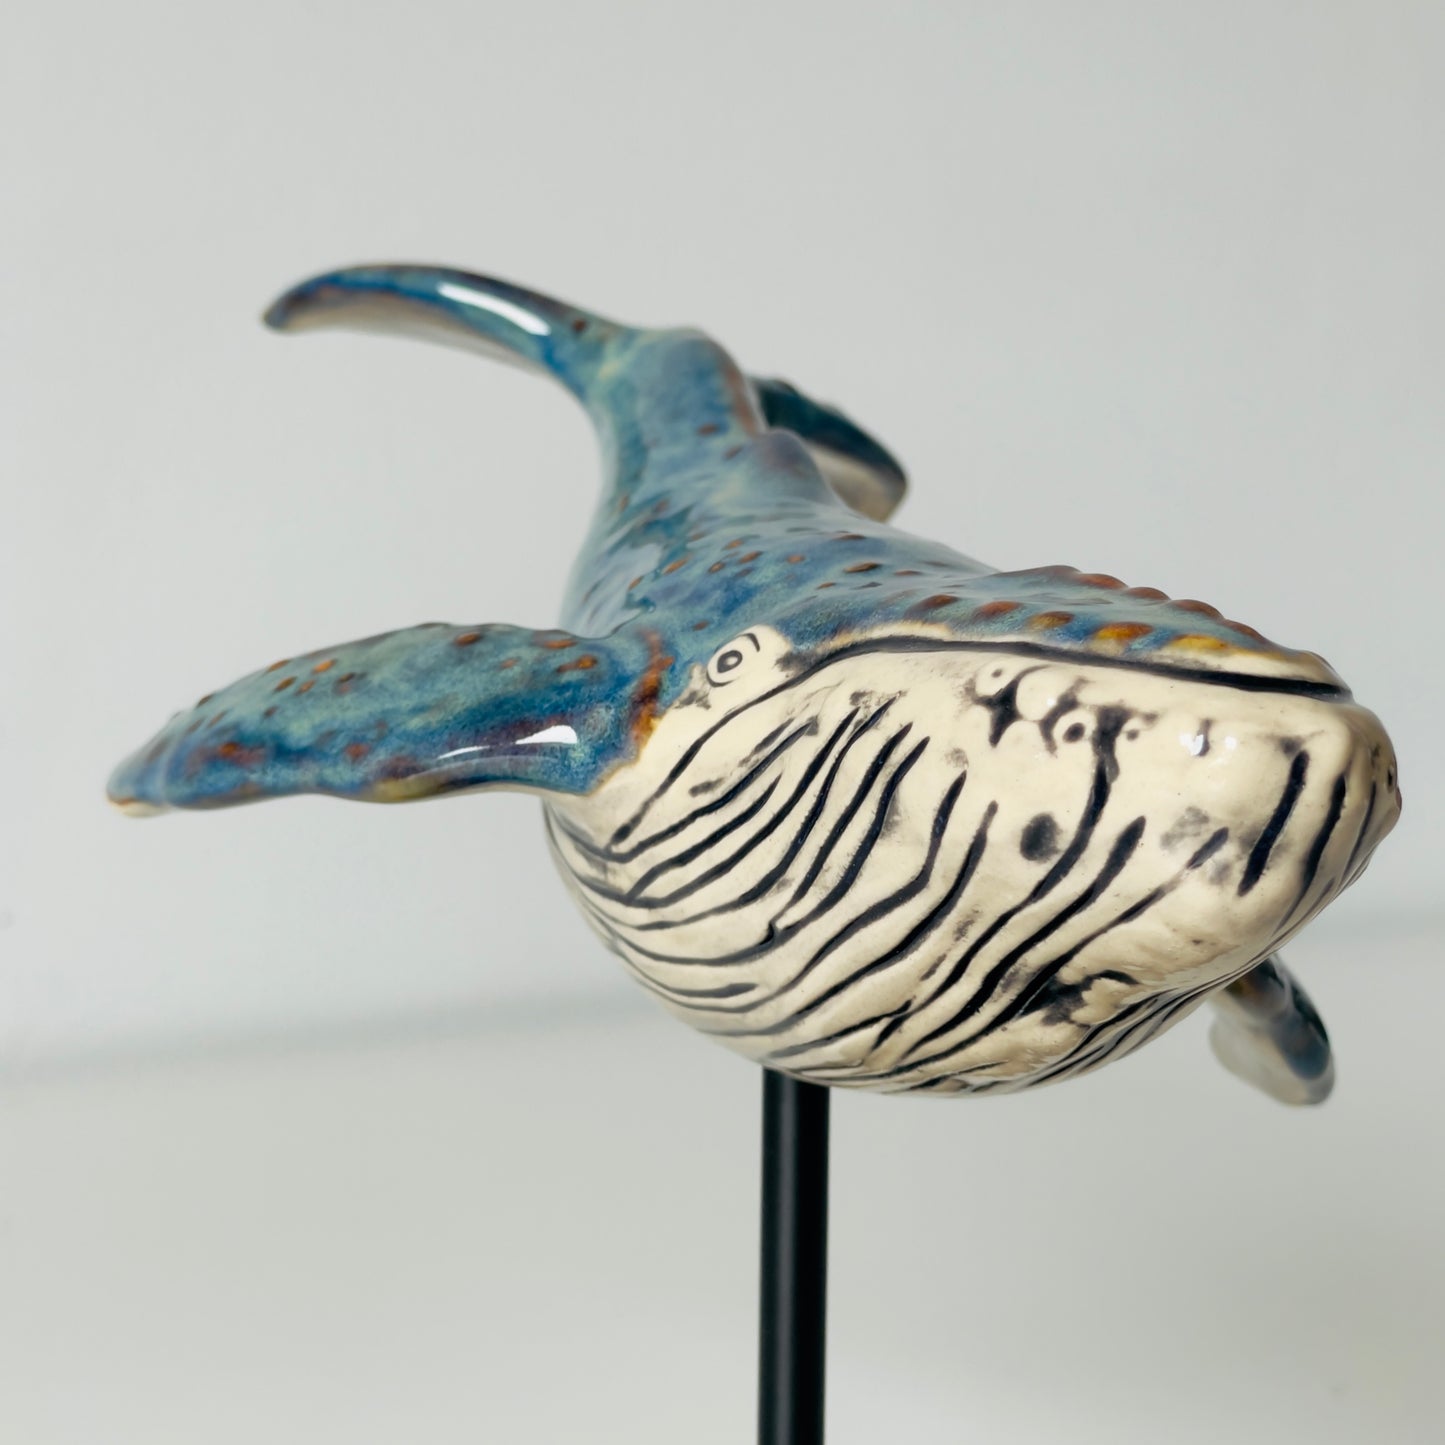 Humpback Whale on a stand